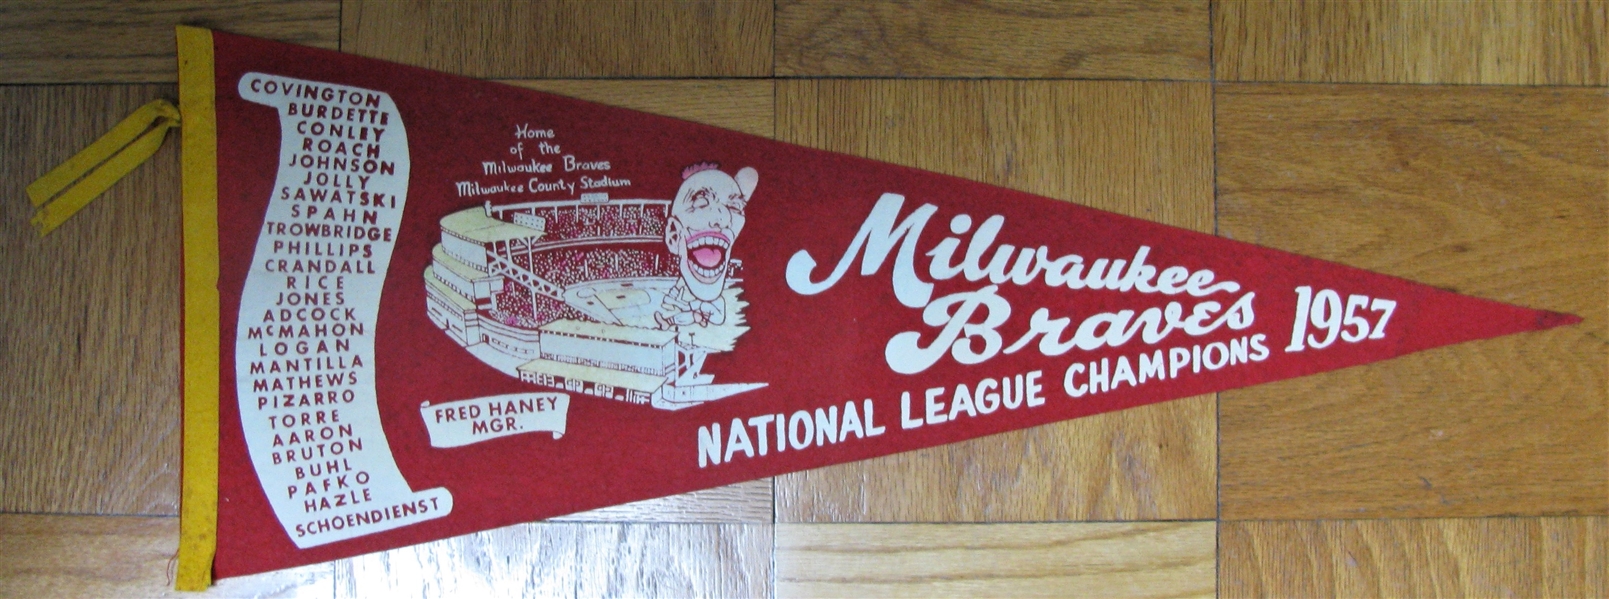 1957 MILWAUKEE BRAVES NATIONAL LEAGUE CHAMPIONS SCROLL PENNANT